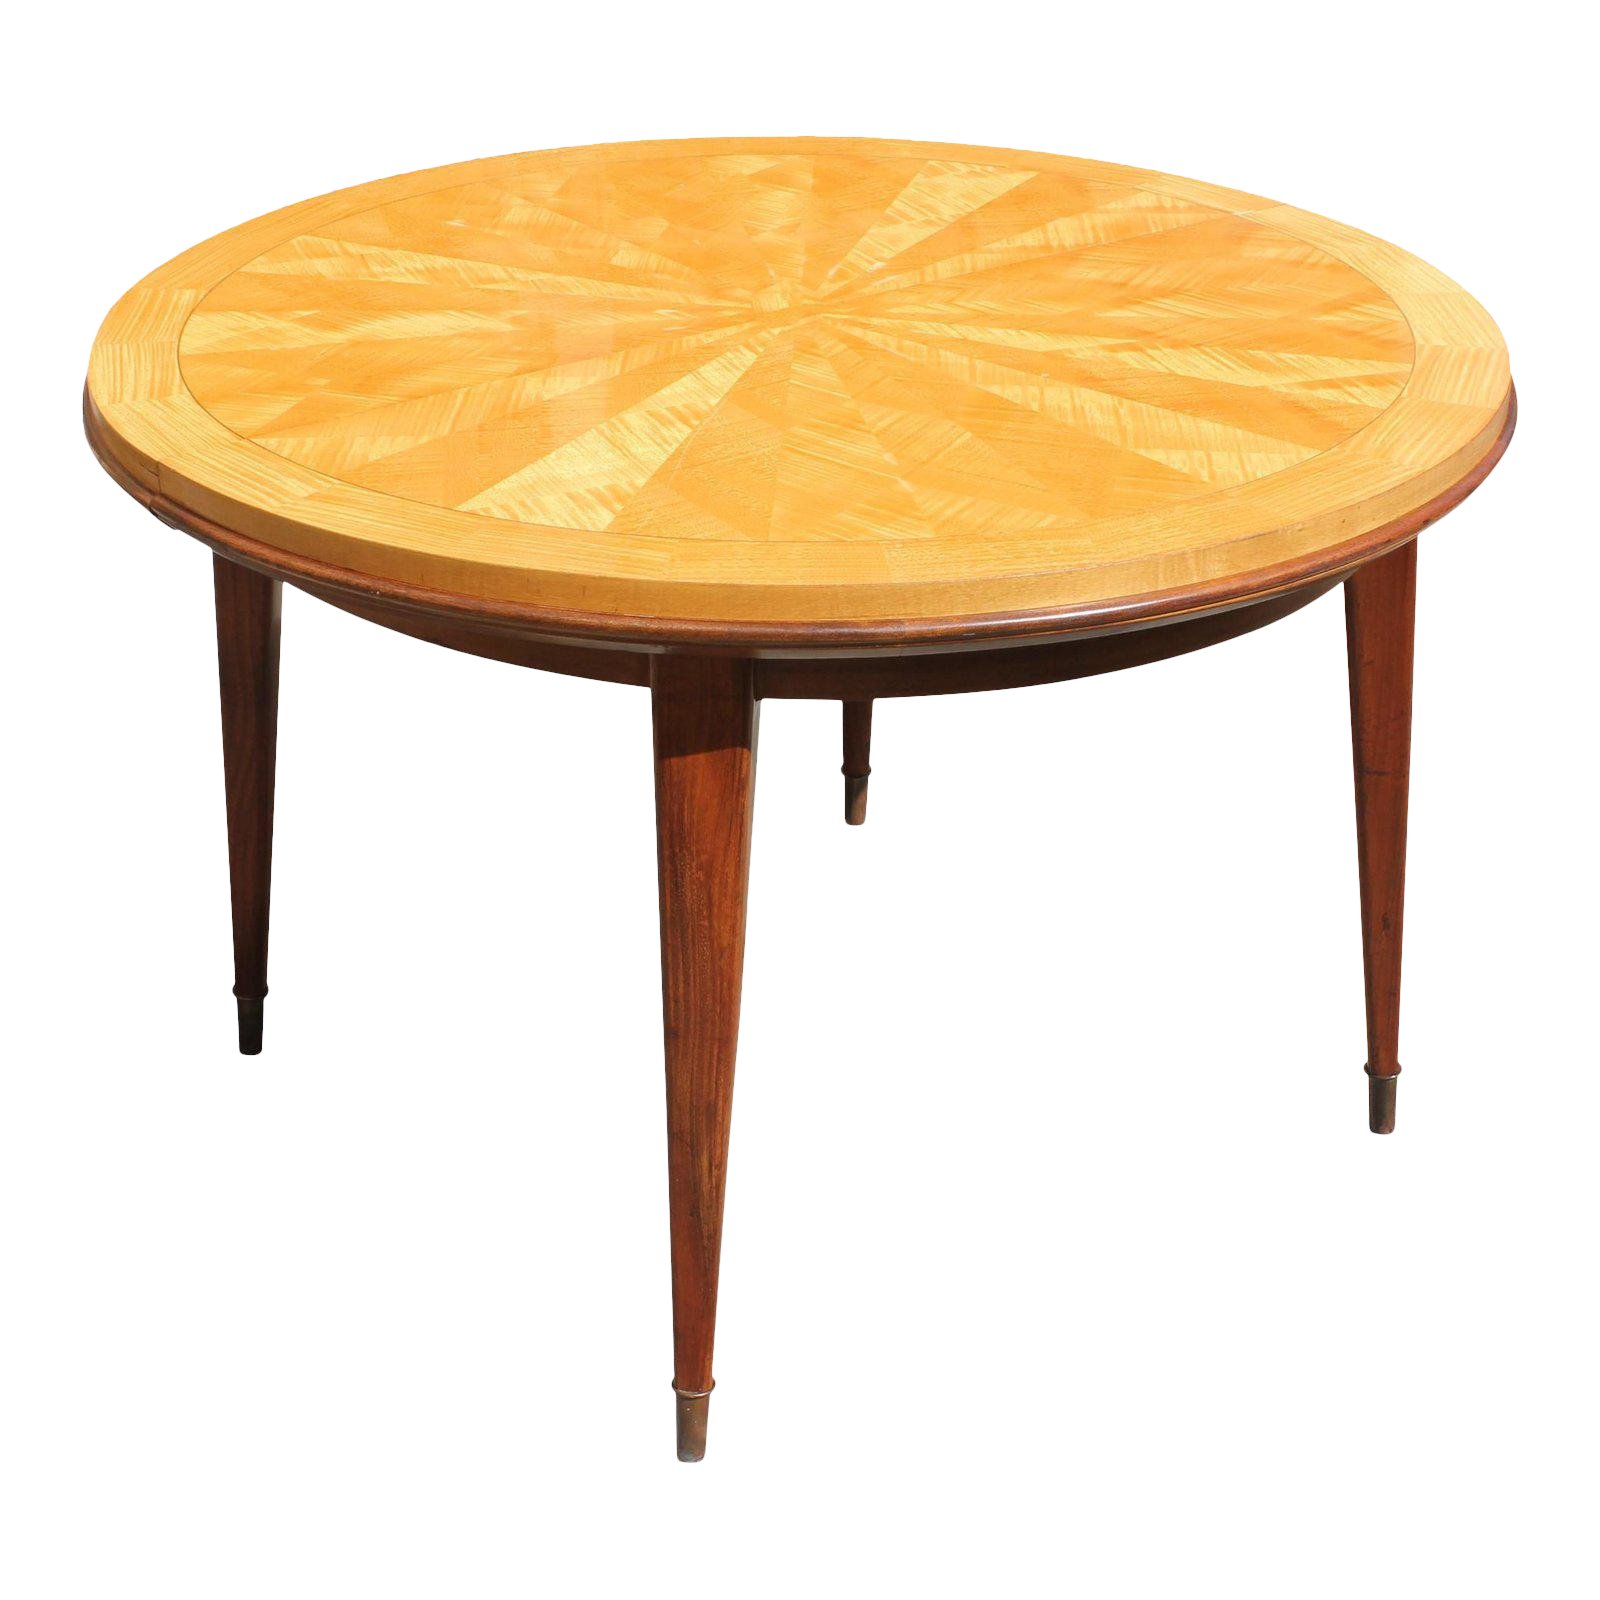 vintage jules leleu french art deco sunburst round dining table accent chairish carpet door threshold outdoor lounge furniture clearance victorian occasional drawer console